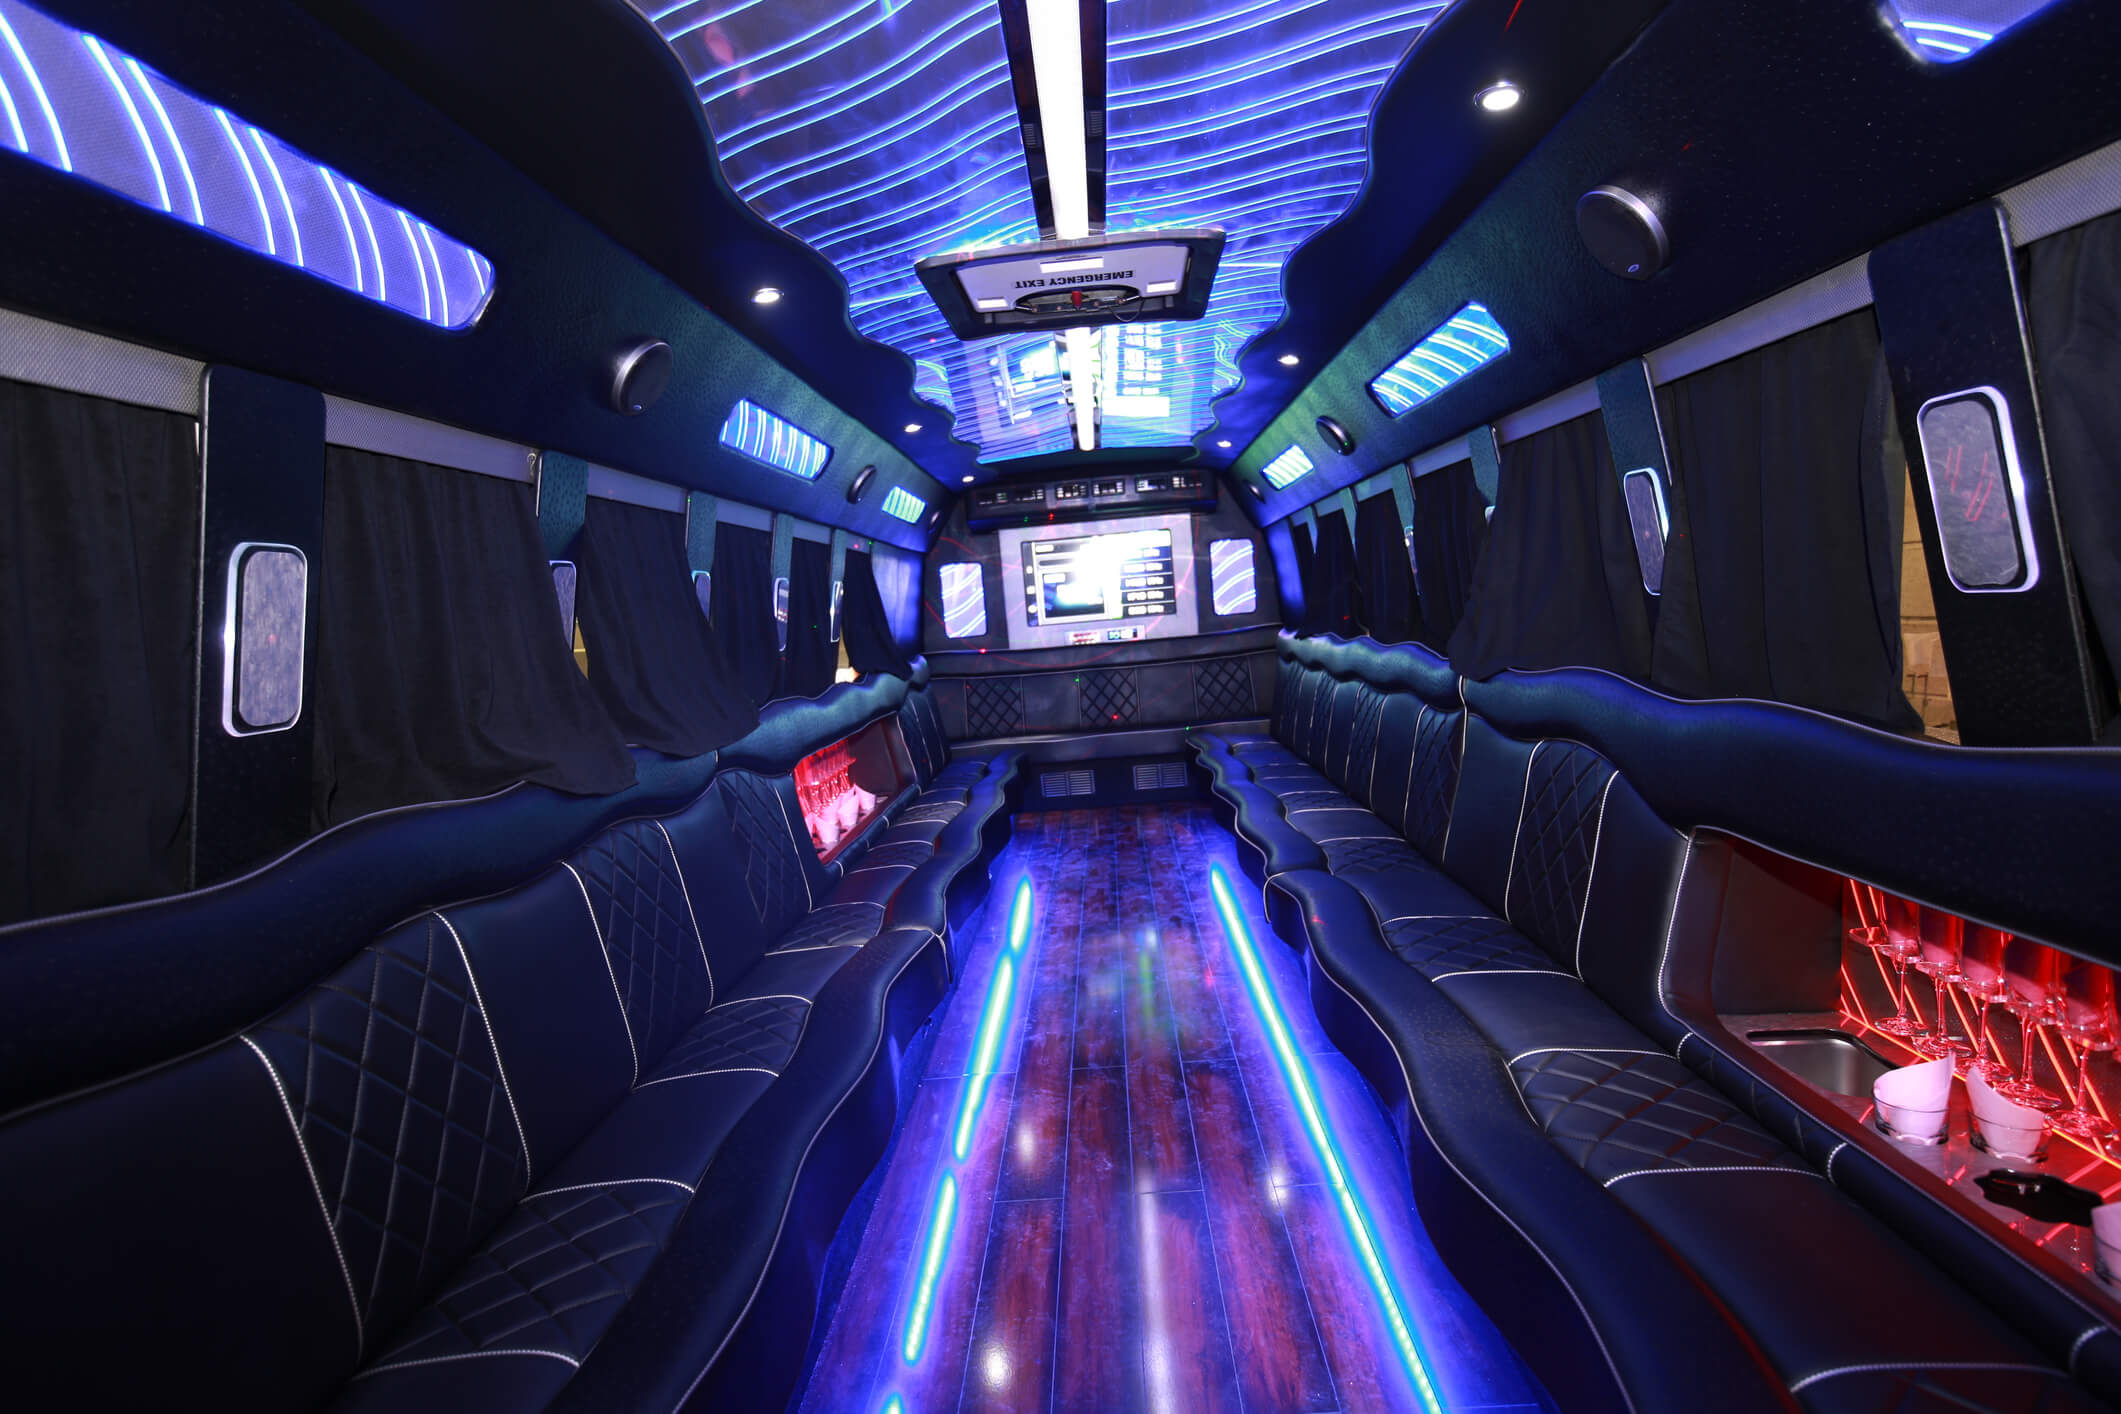 Interior of party bus with black leather seats and blue trim lighting